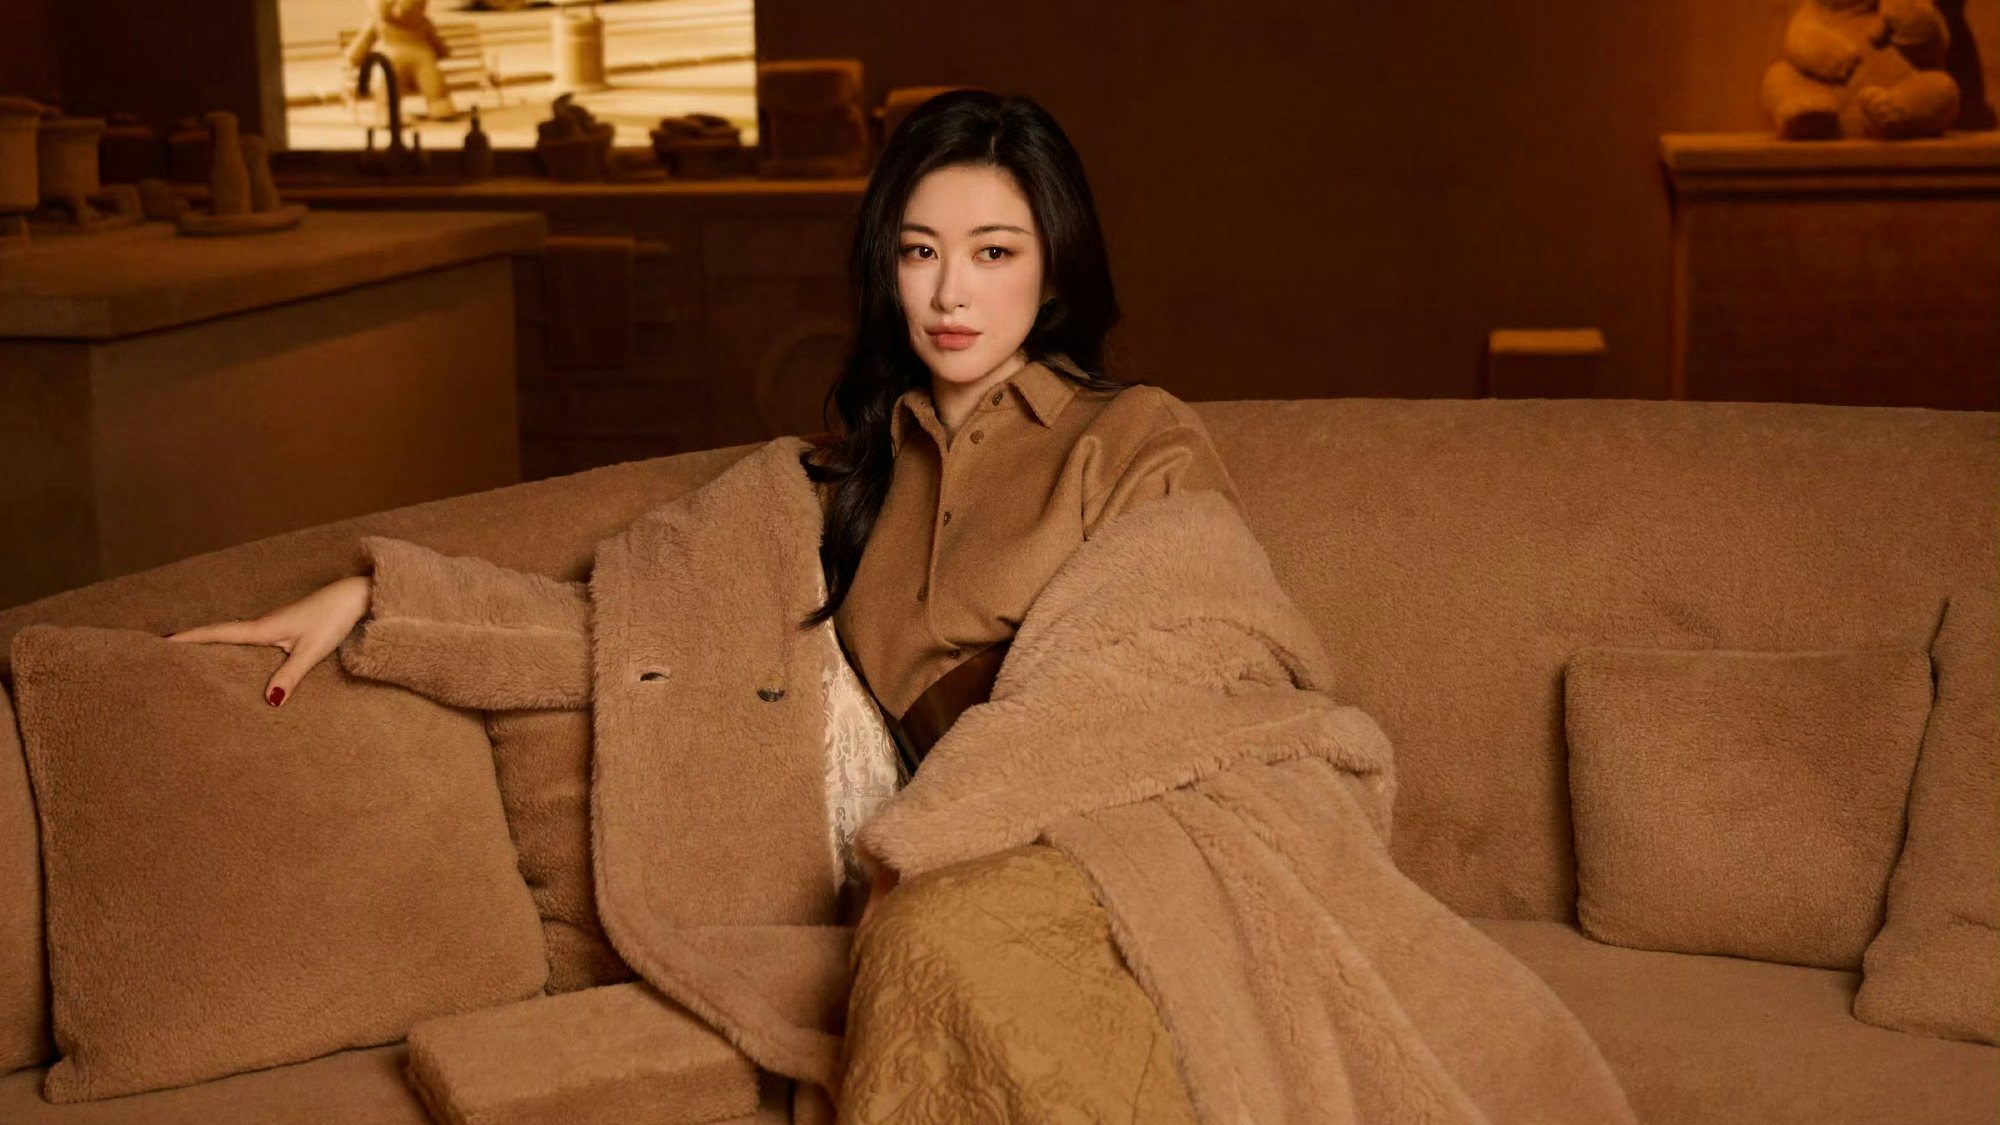 Amid economic headwinds, China's fashion trends shift from bold dopamine looks to quieter luxury, embracing calming and heritage-inspired aesthetics. Photo: Max Mara